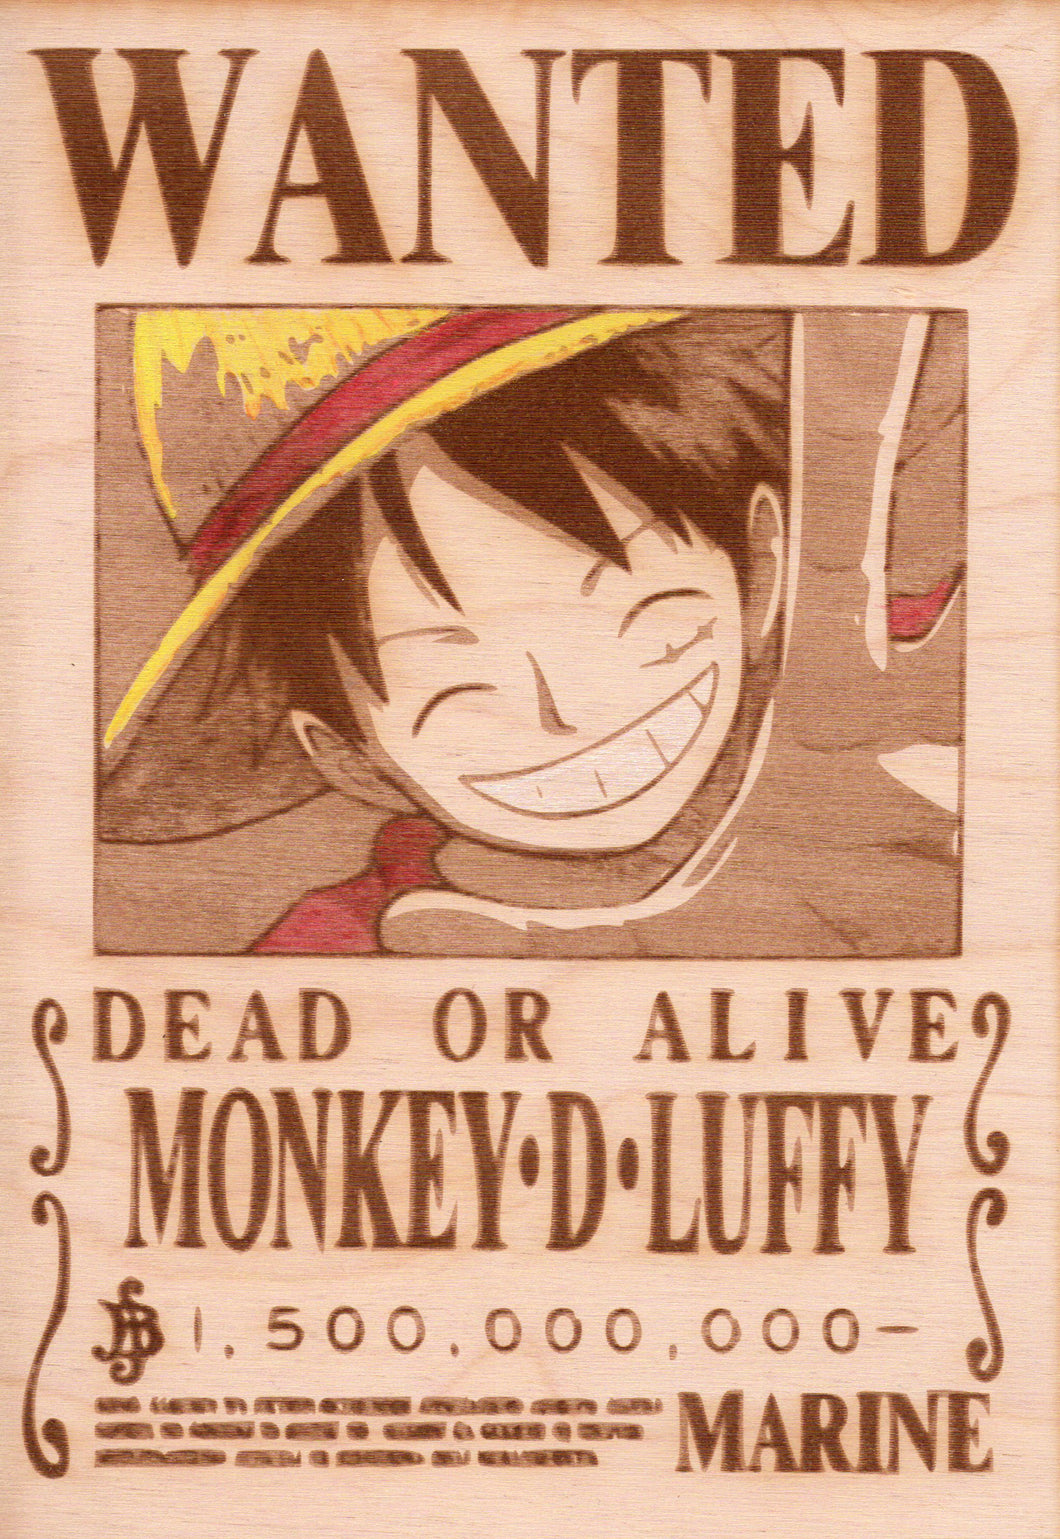 One Piece - Luffy Wooden Wanted Poster (Color) - TantrumCollectibles.com